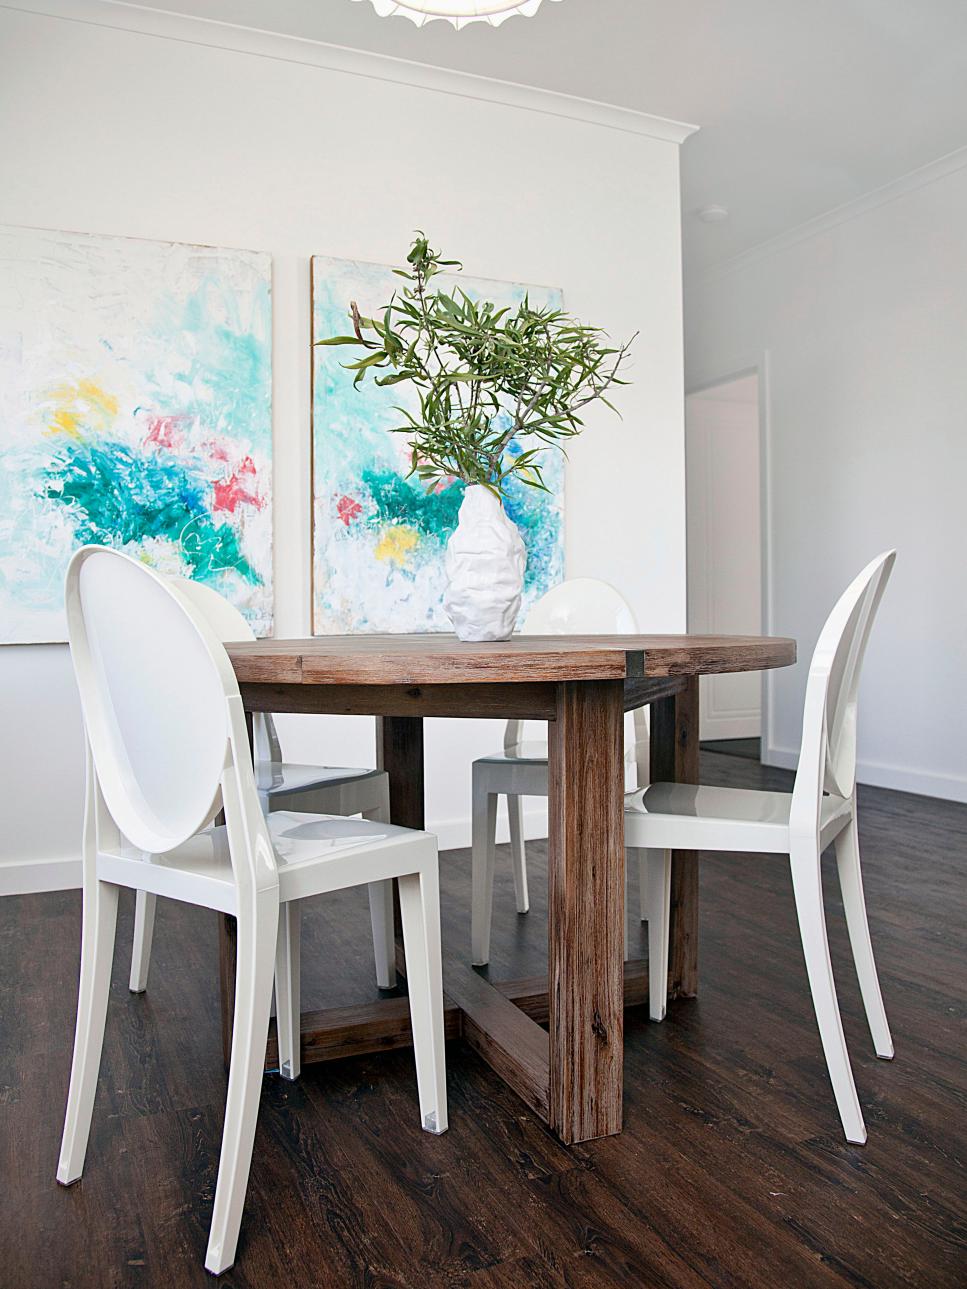 Turquoise Artwork in White Dining Room With Round Wood Table